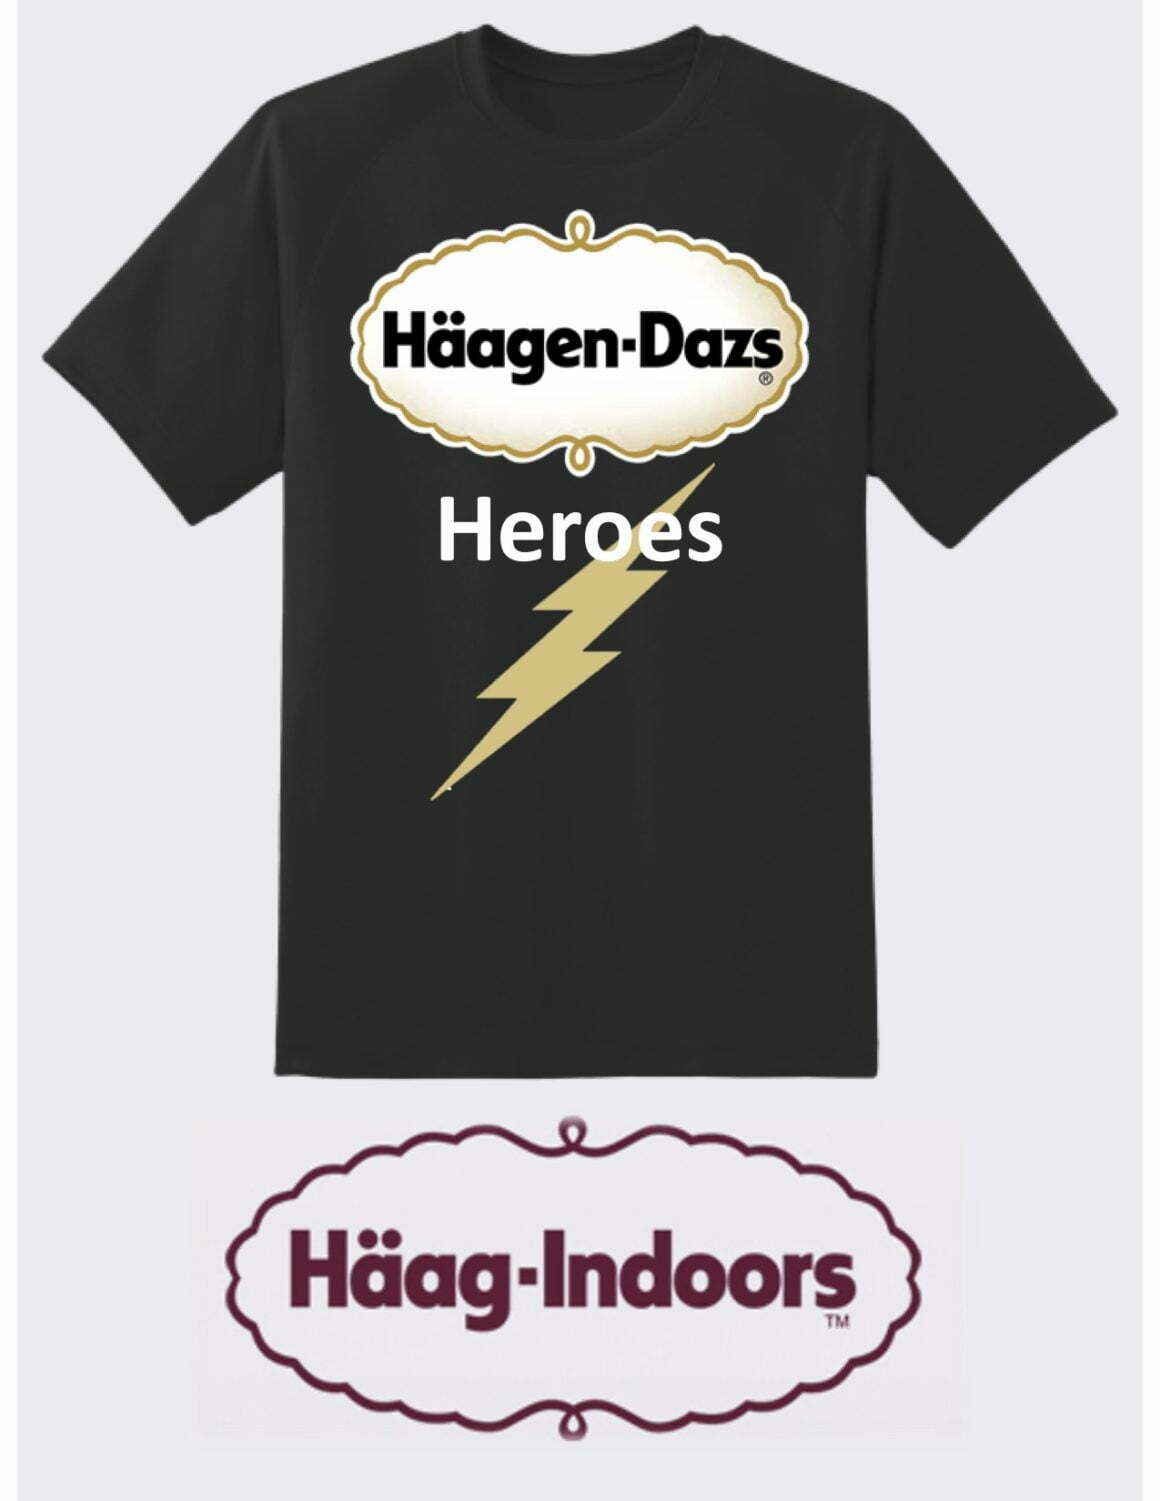 There’s still plenty of time to support the Haagen-Dazs Heroes in their efforts to raise funds for Bermuda Cancer & Health in the virtual Relay for Life